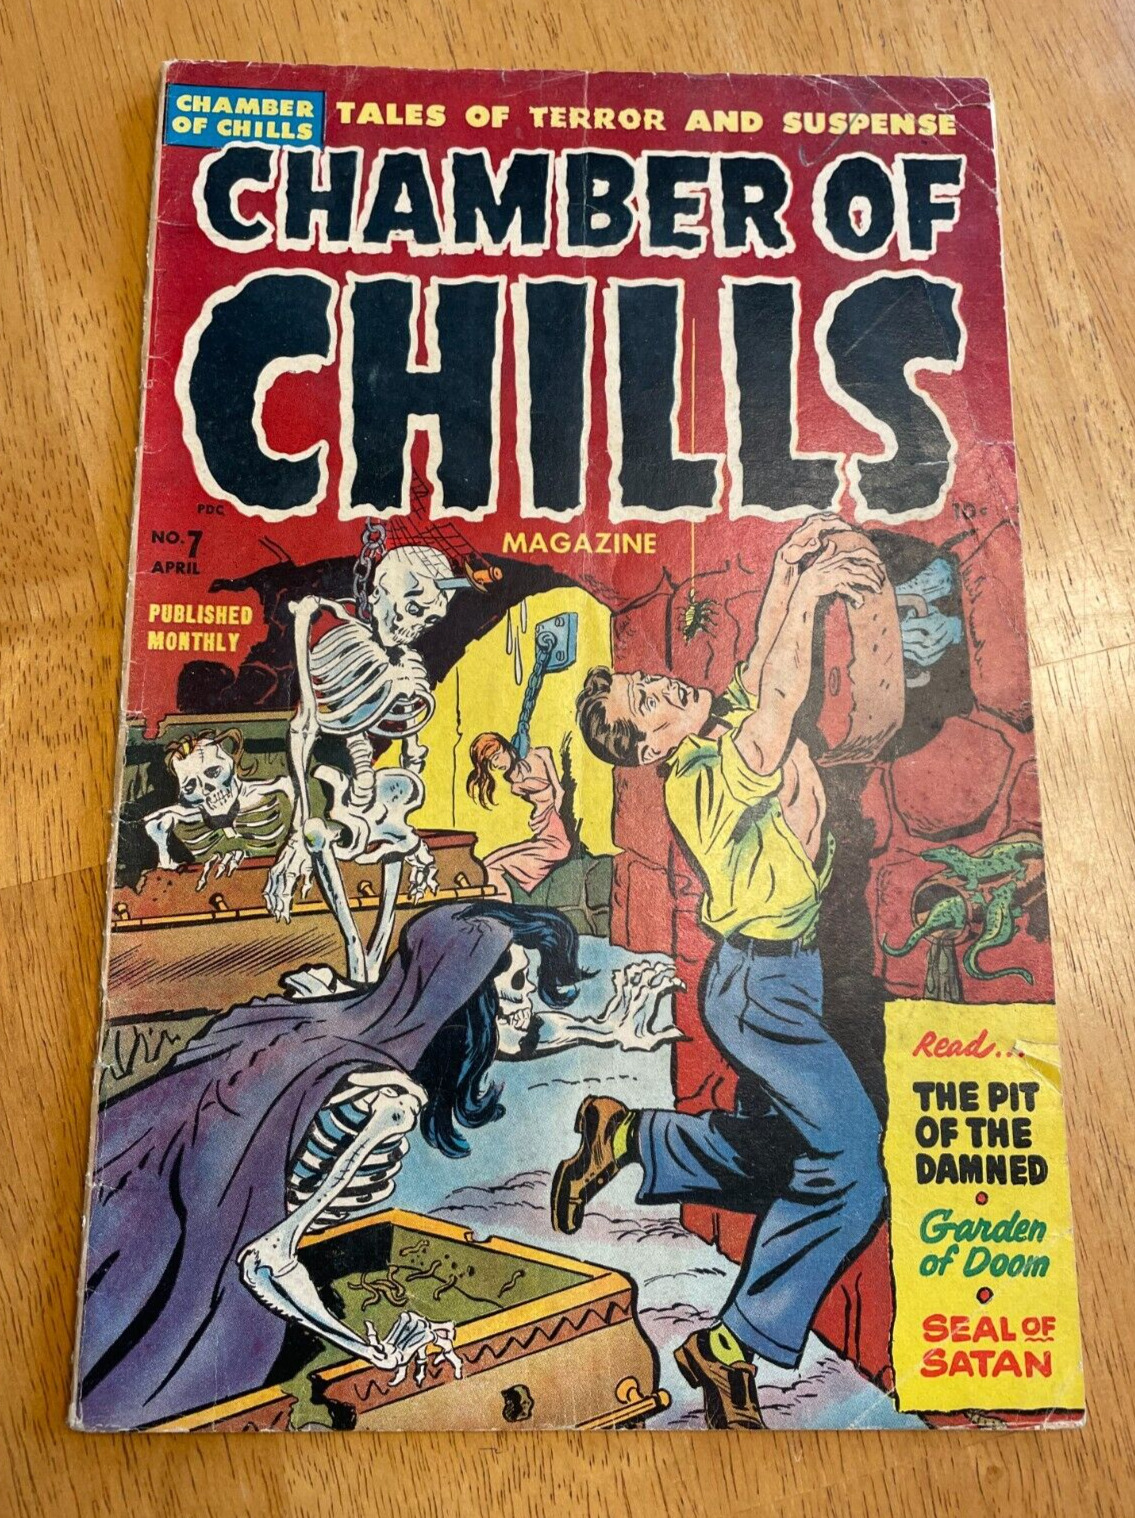 CHAMBER OF CHILLS #7 SOTI SEVERED HEADS TORTURE CHAMBER 1952